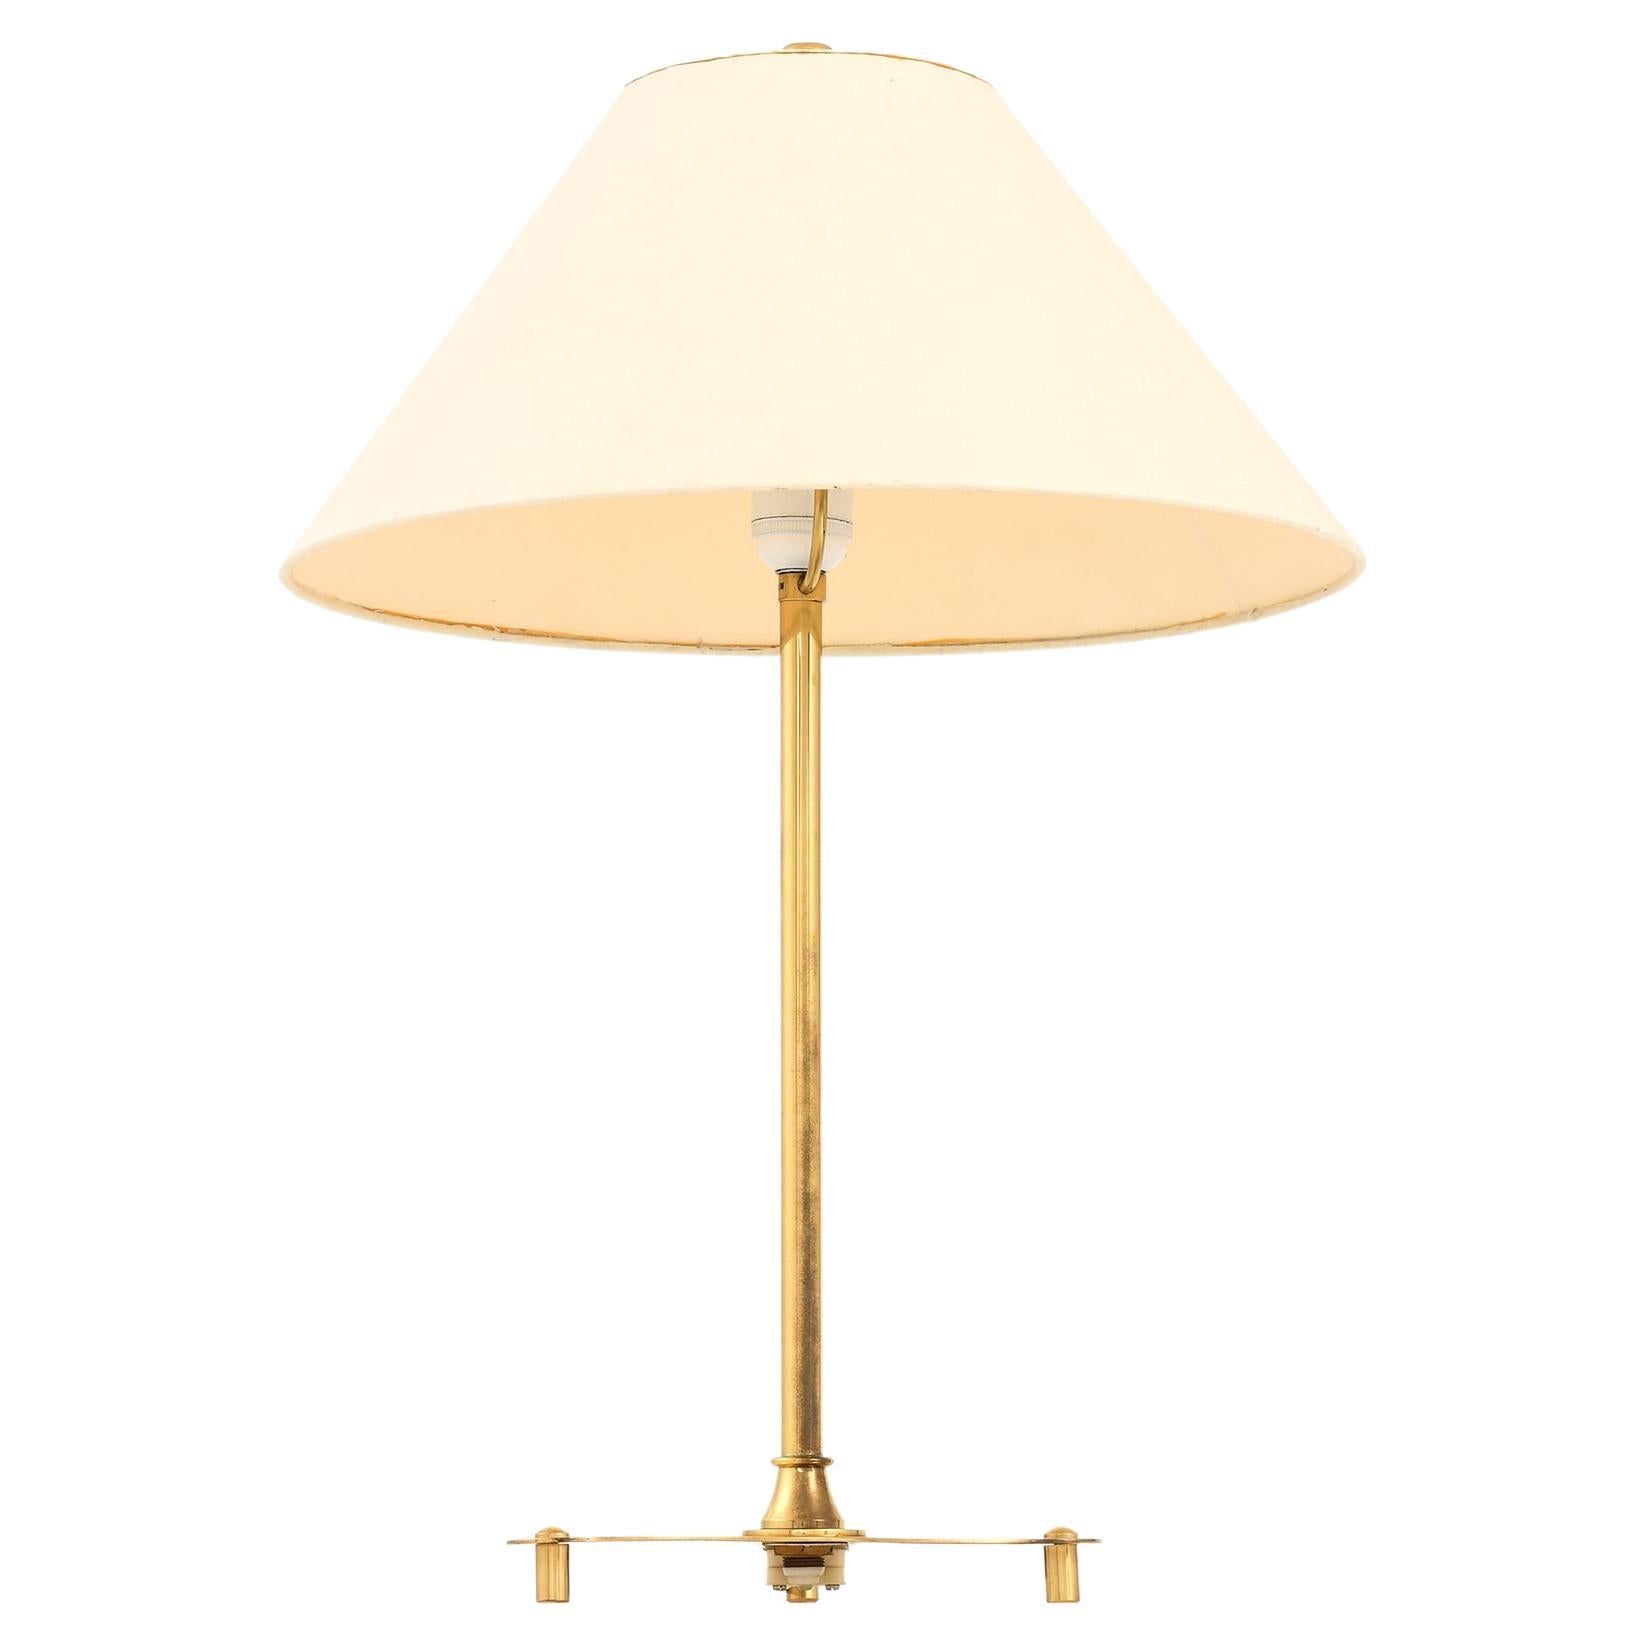 Table Lamp in Brass and Original Lamp Shade by Josef Frank, 1960's Svenskt Tenn For Sale